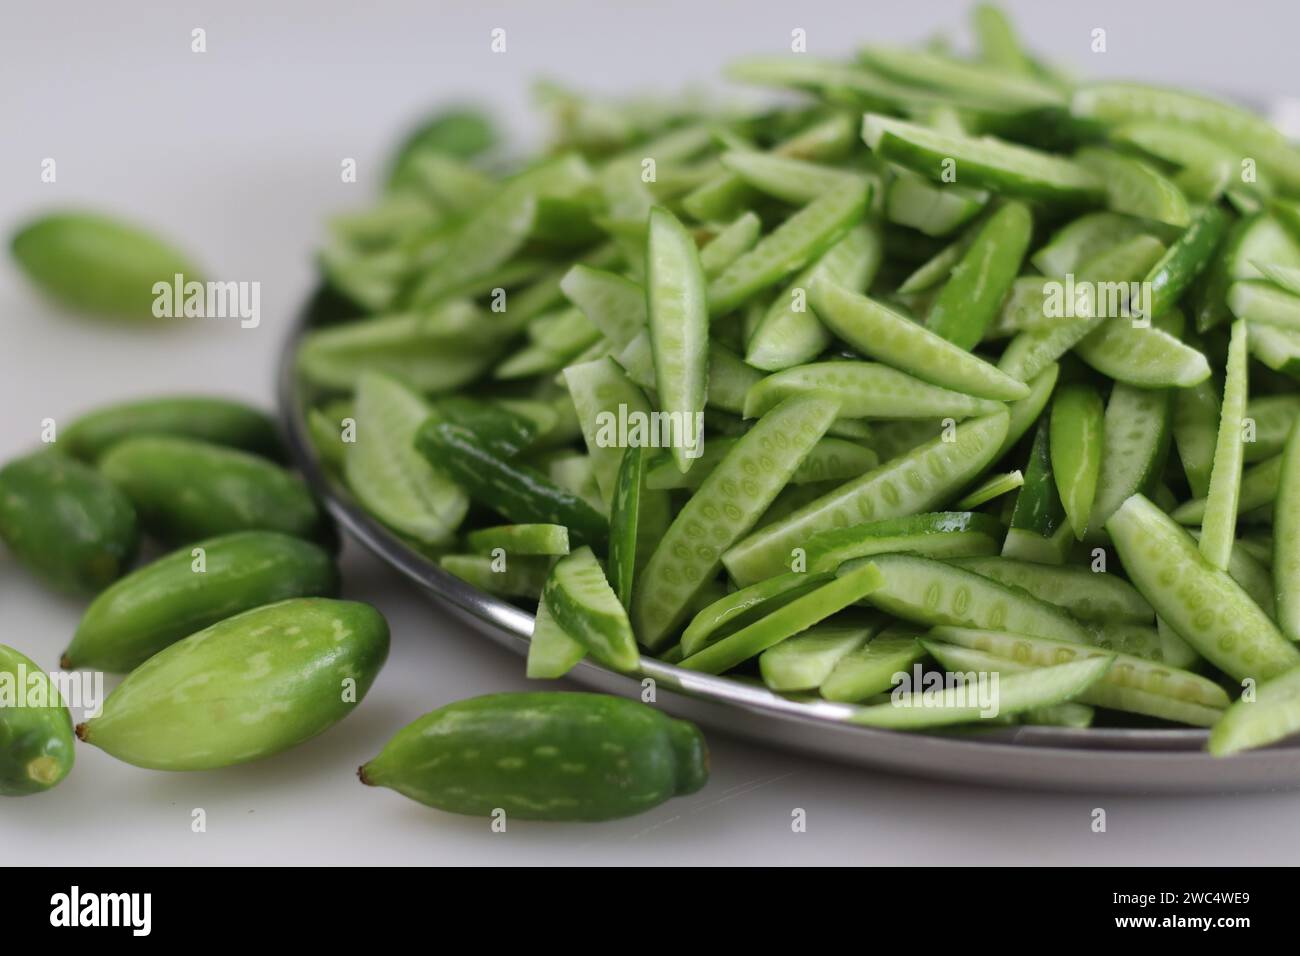 Heap of Ivy gourd or Kovaka vegetables, meticulously sliced lengthwise. Useful for food blogs, menus, and wellness content for promoting healthy lifes Stock Photo